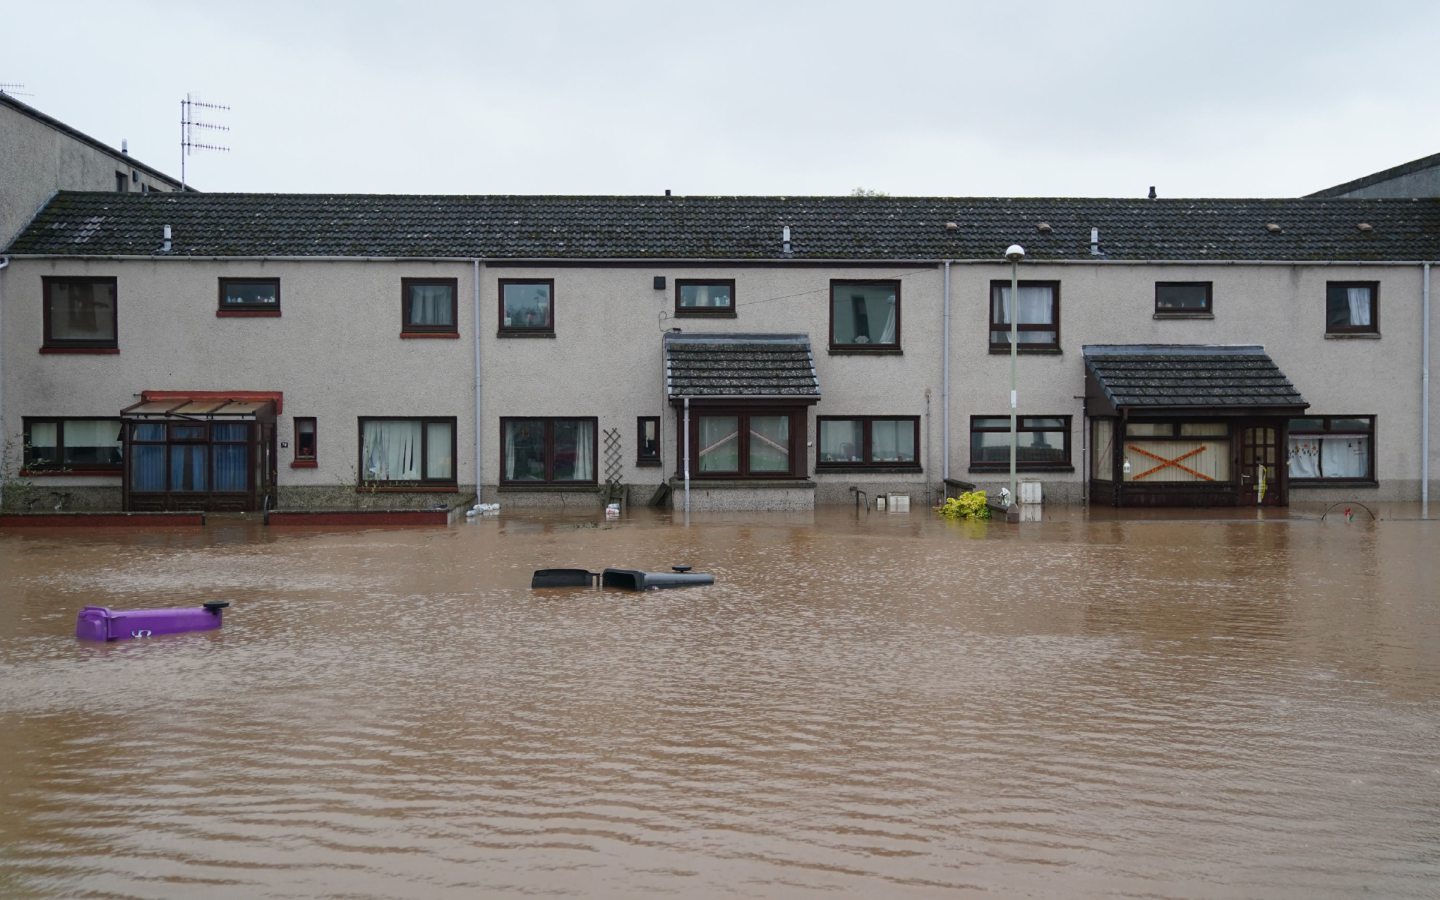 Residents were left stranded as the water levels were higher than some windows and doors.